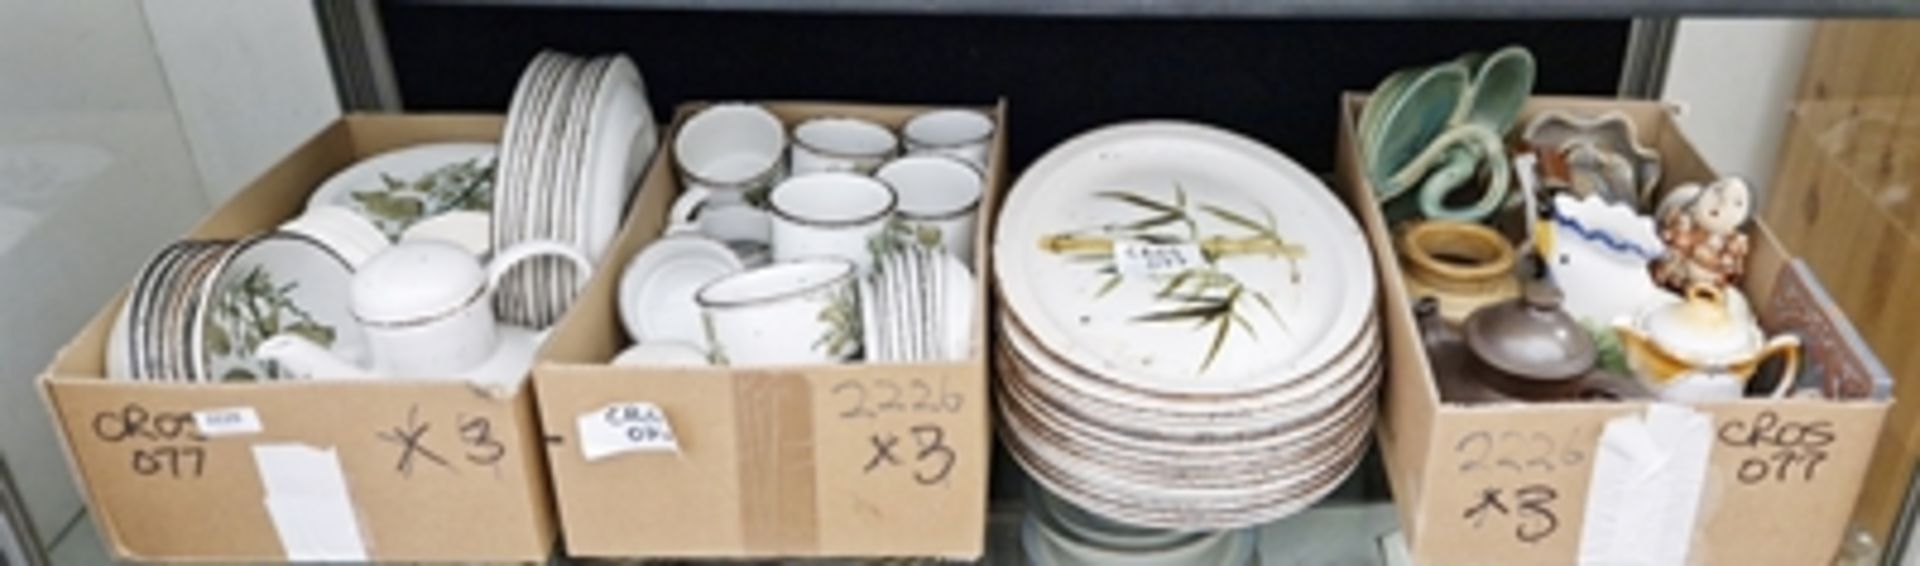 Midwinter part service, Green Leaves Stonehenge oven to tableware to include 10 dinner plates, eight